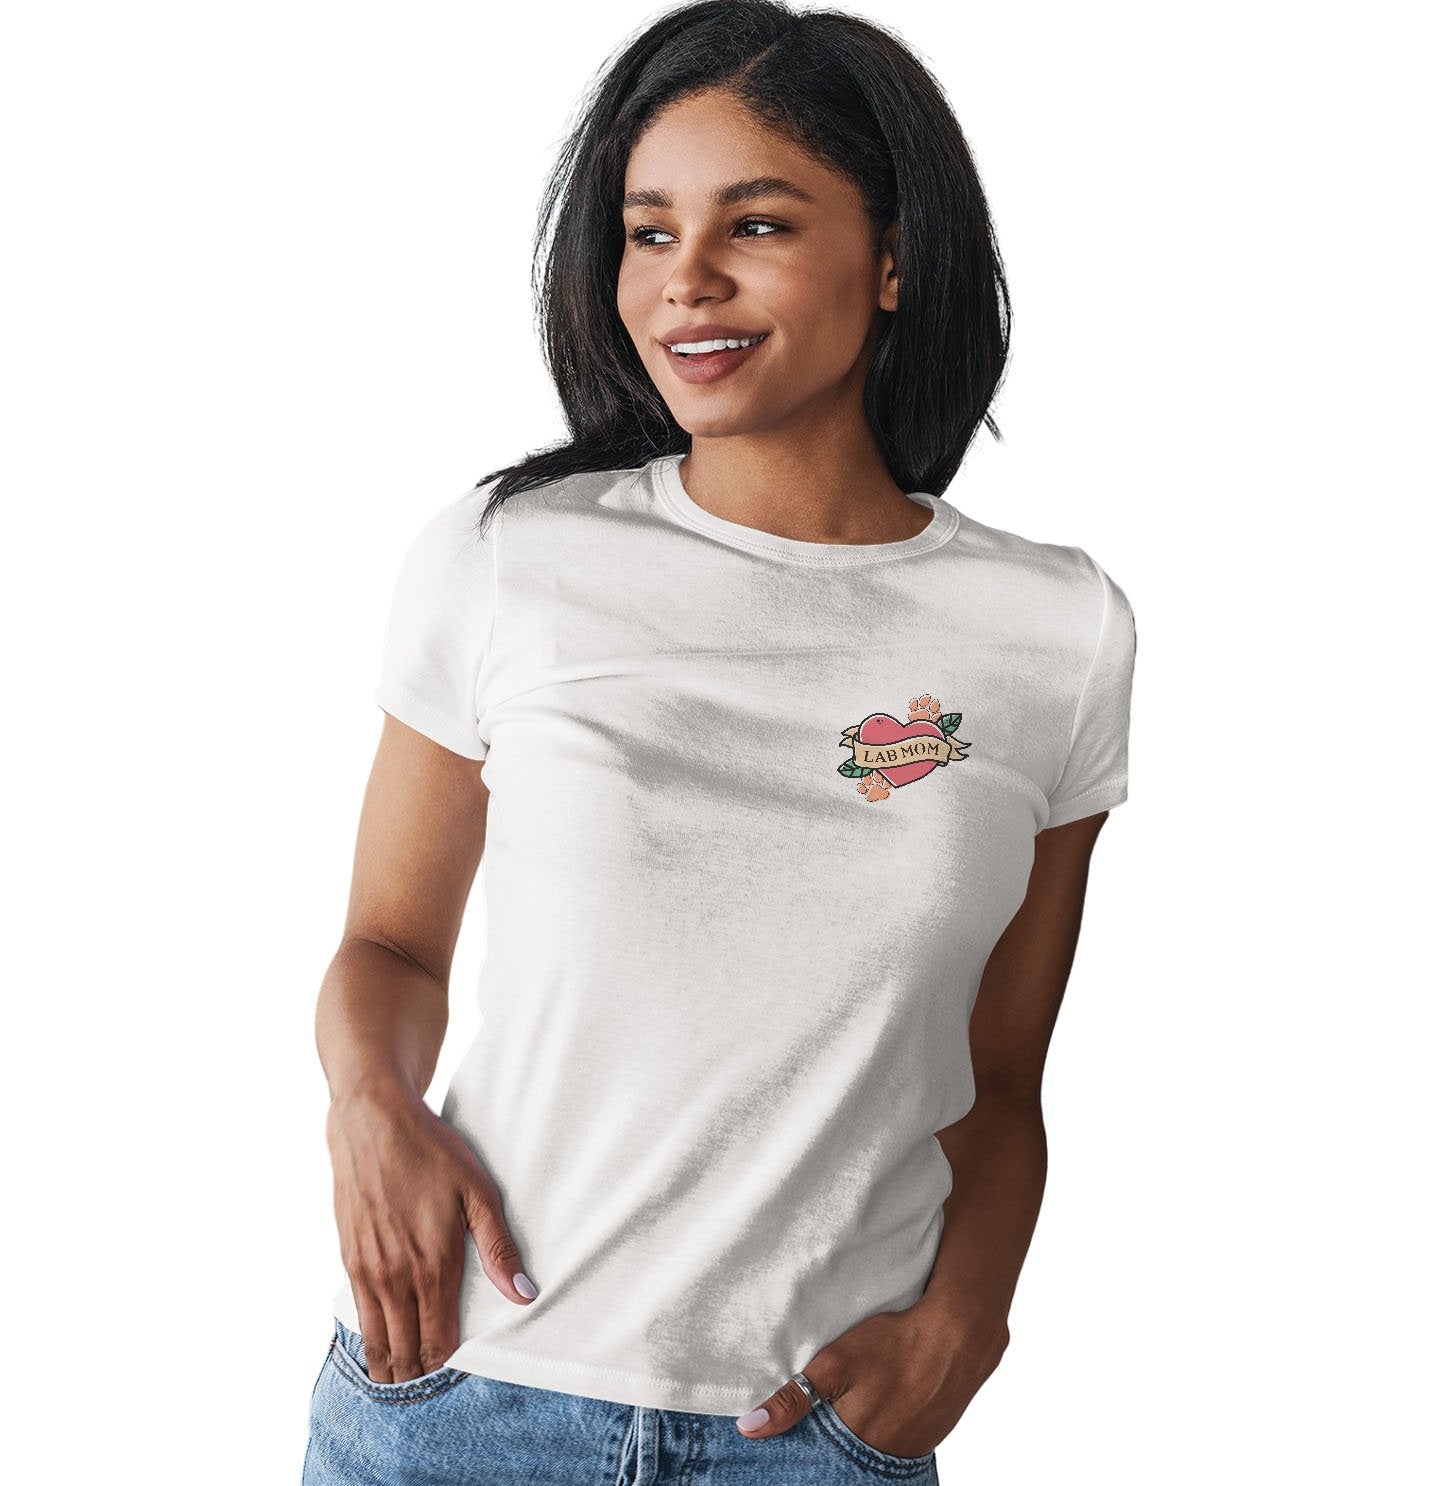 Lab Mom Heart - Pocket - Women's Fitted T-Shirt